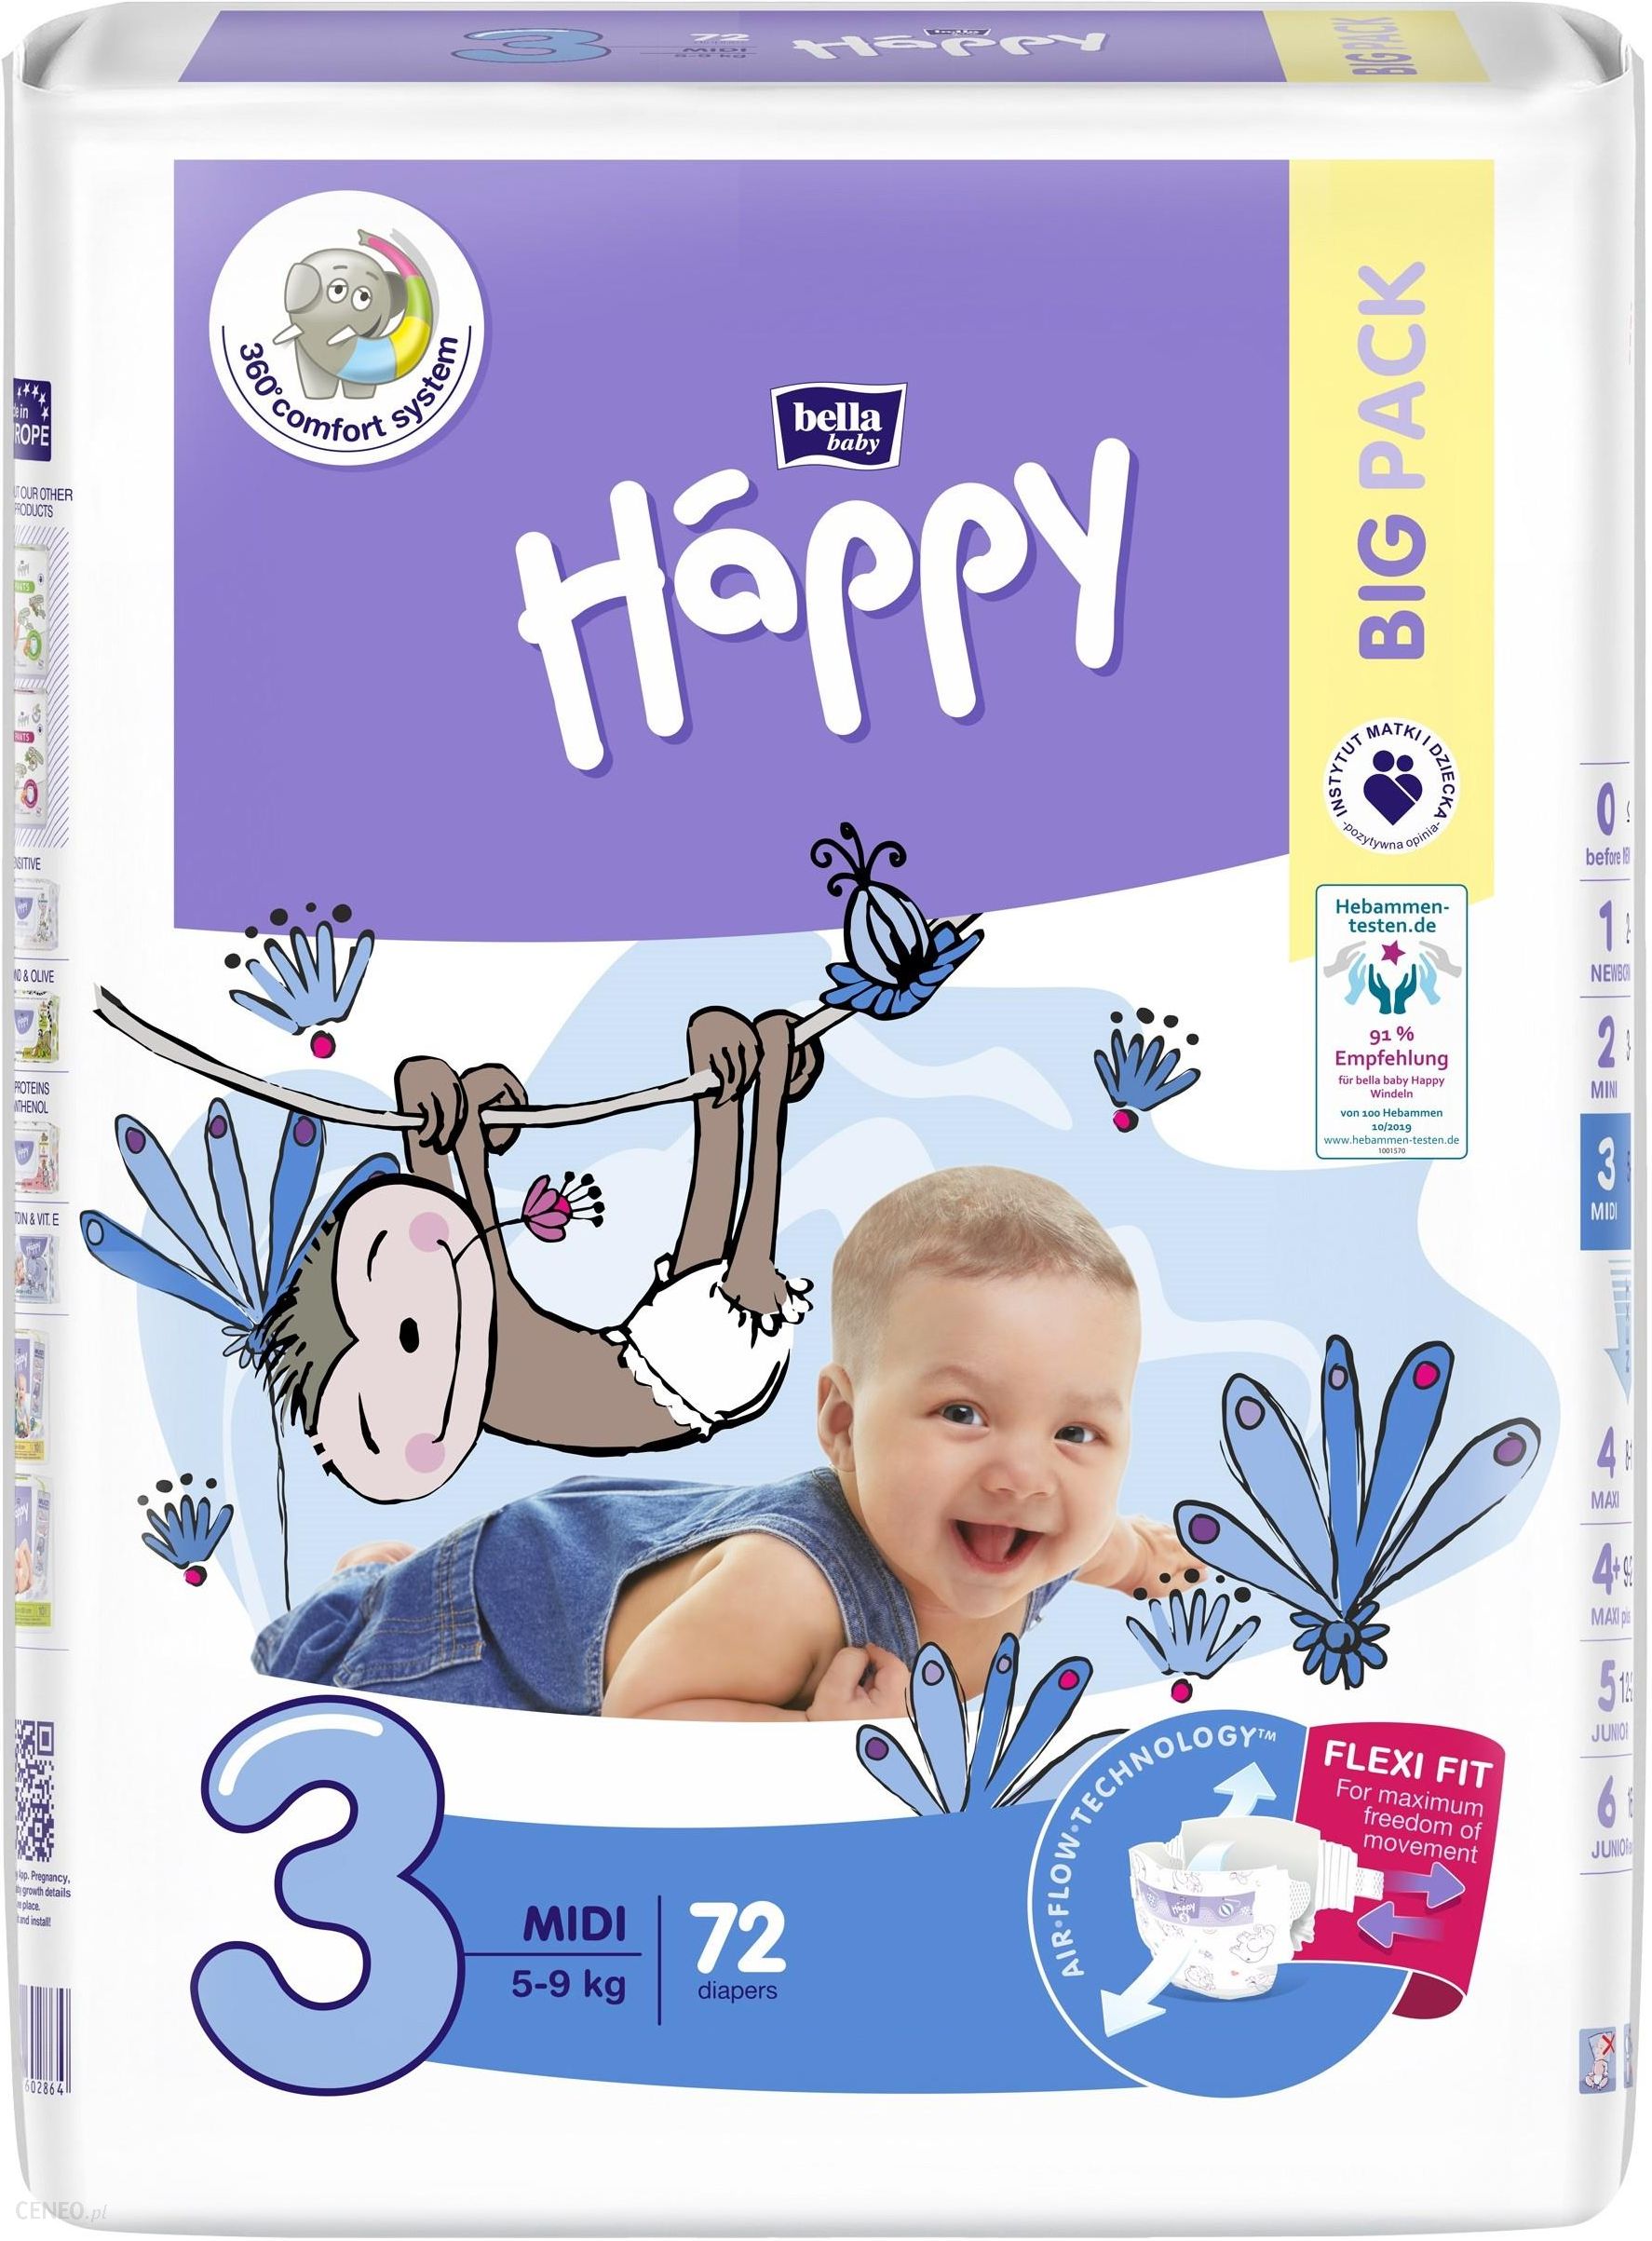 pampers new baby dry 1 96